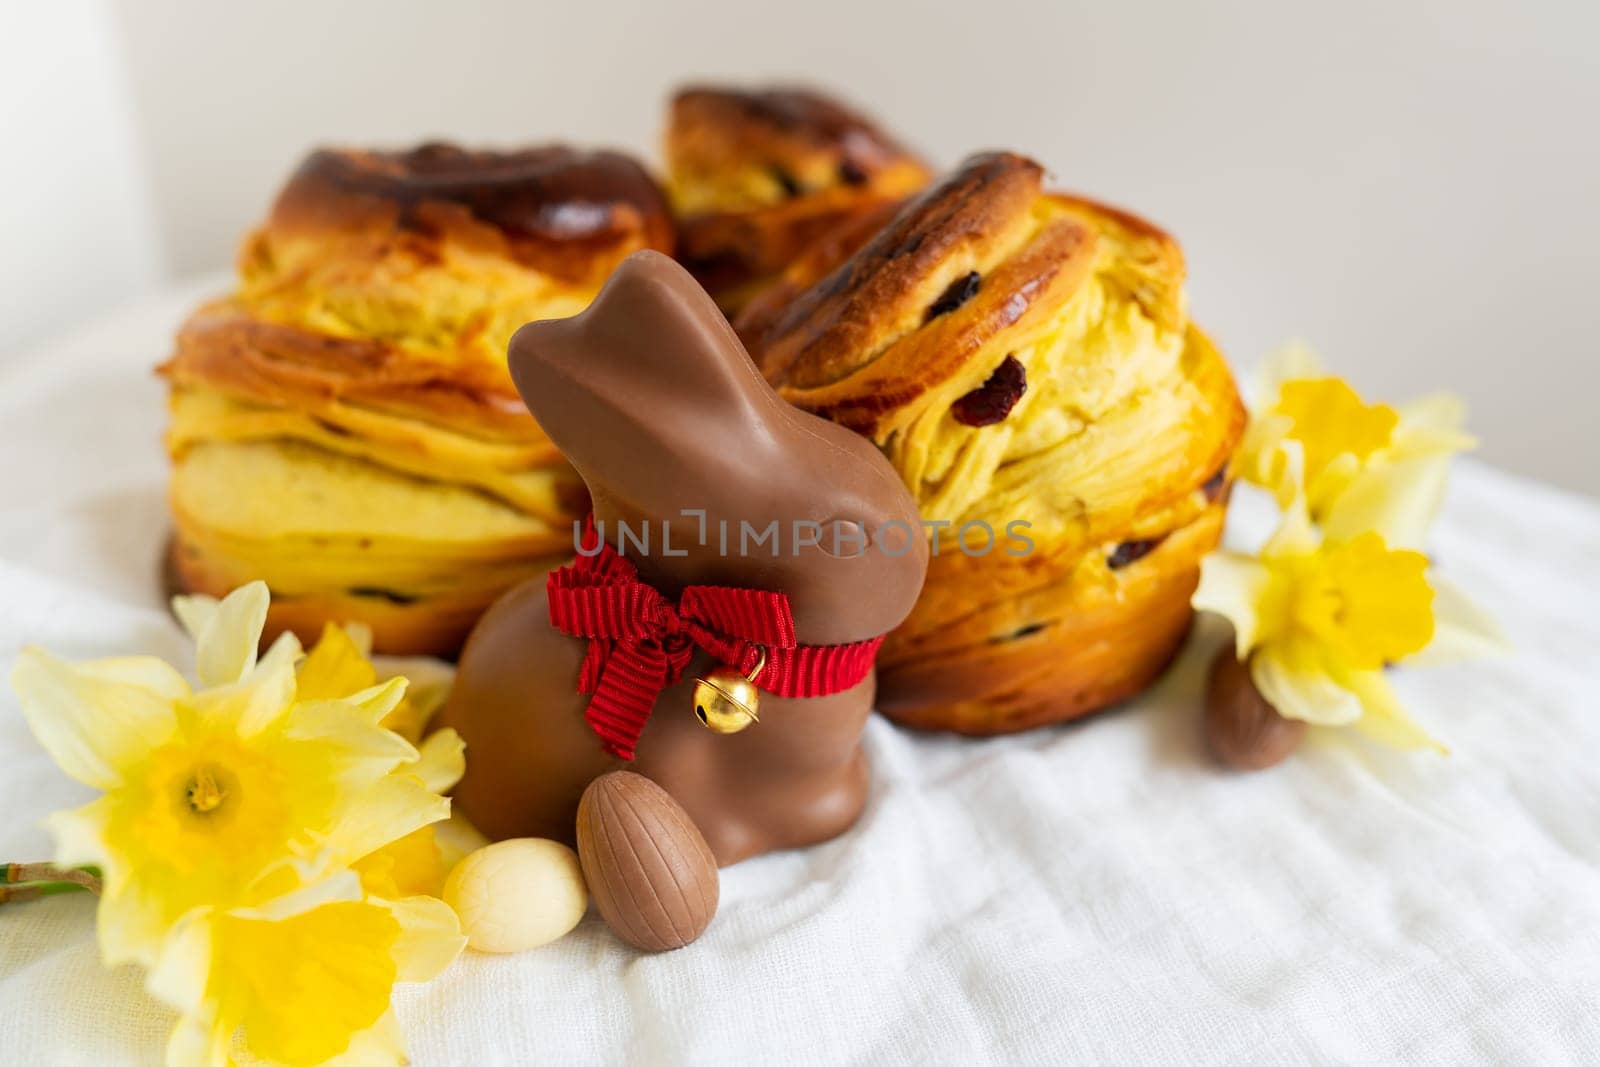 Homemade Easter traditional pastries lie on a green napkin along with daffodil flowers, rabbit, chocolate eggs. Easter baking and decoration